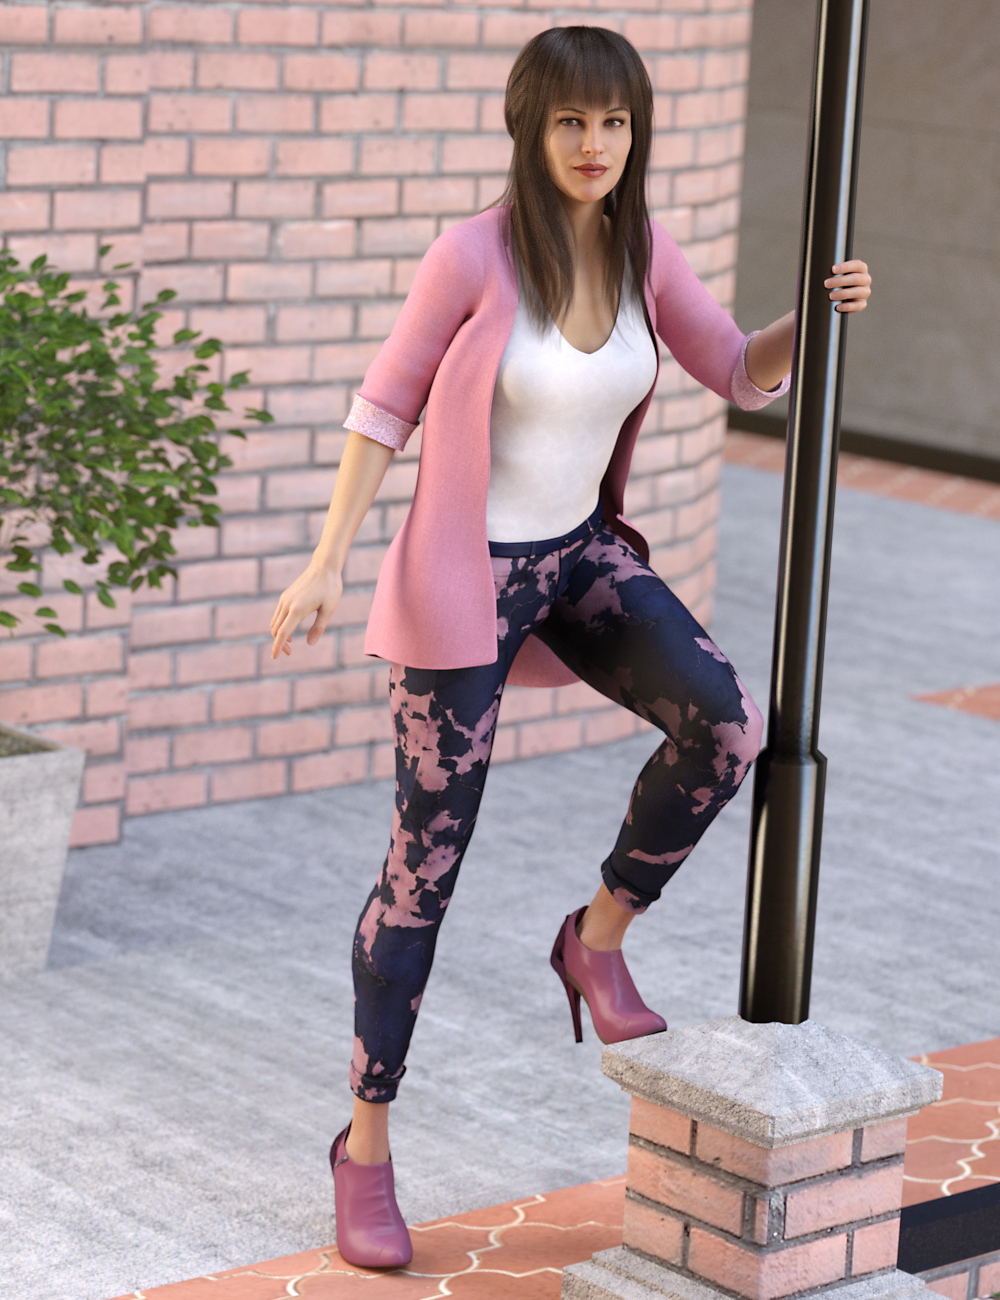 Urban Chic Outfit Textures by: Anna Benjamin, 3D Models by Daz 3D